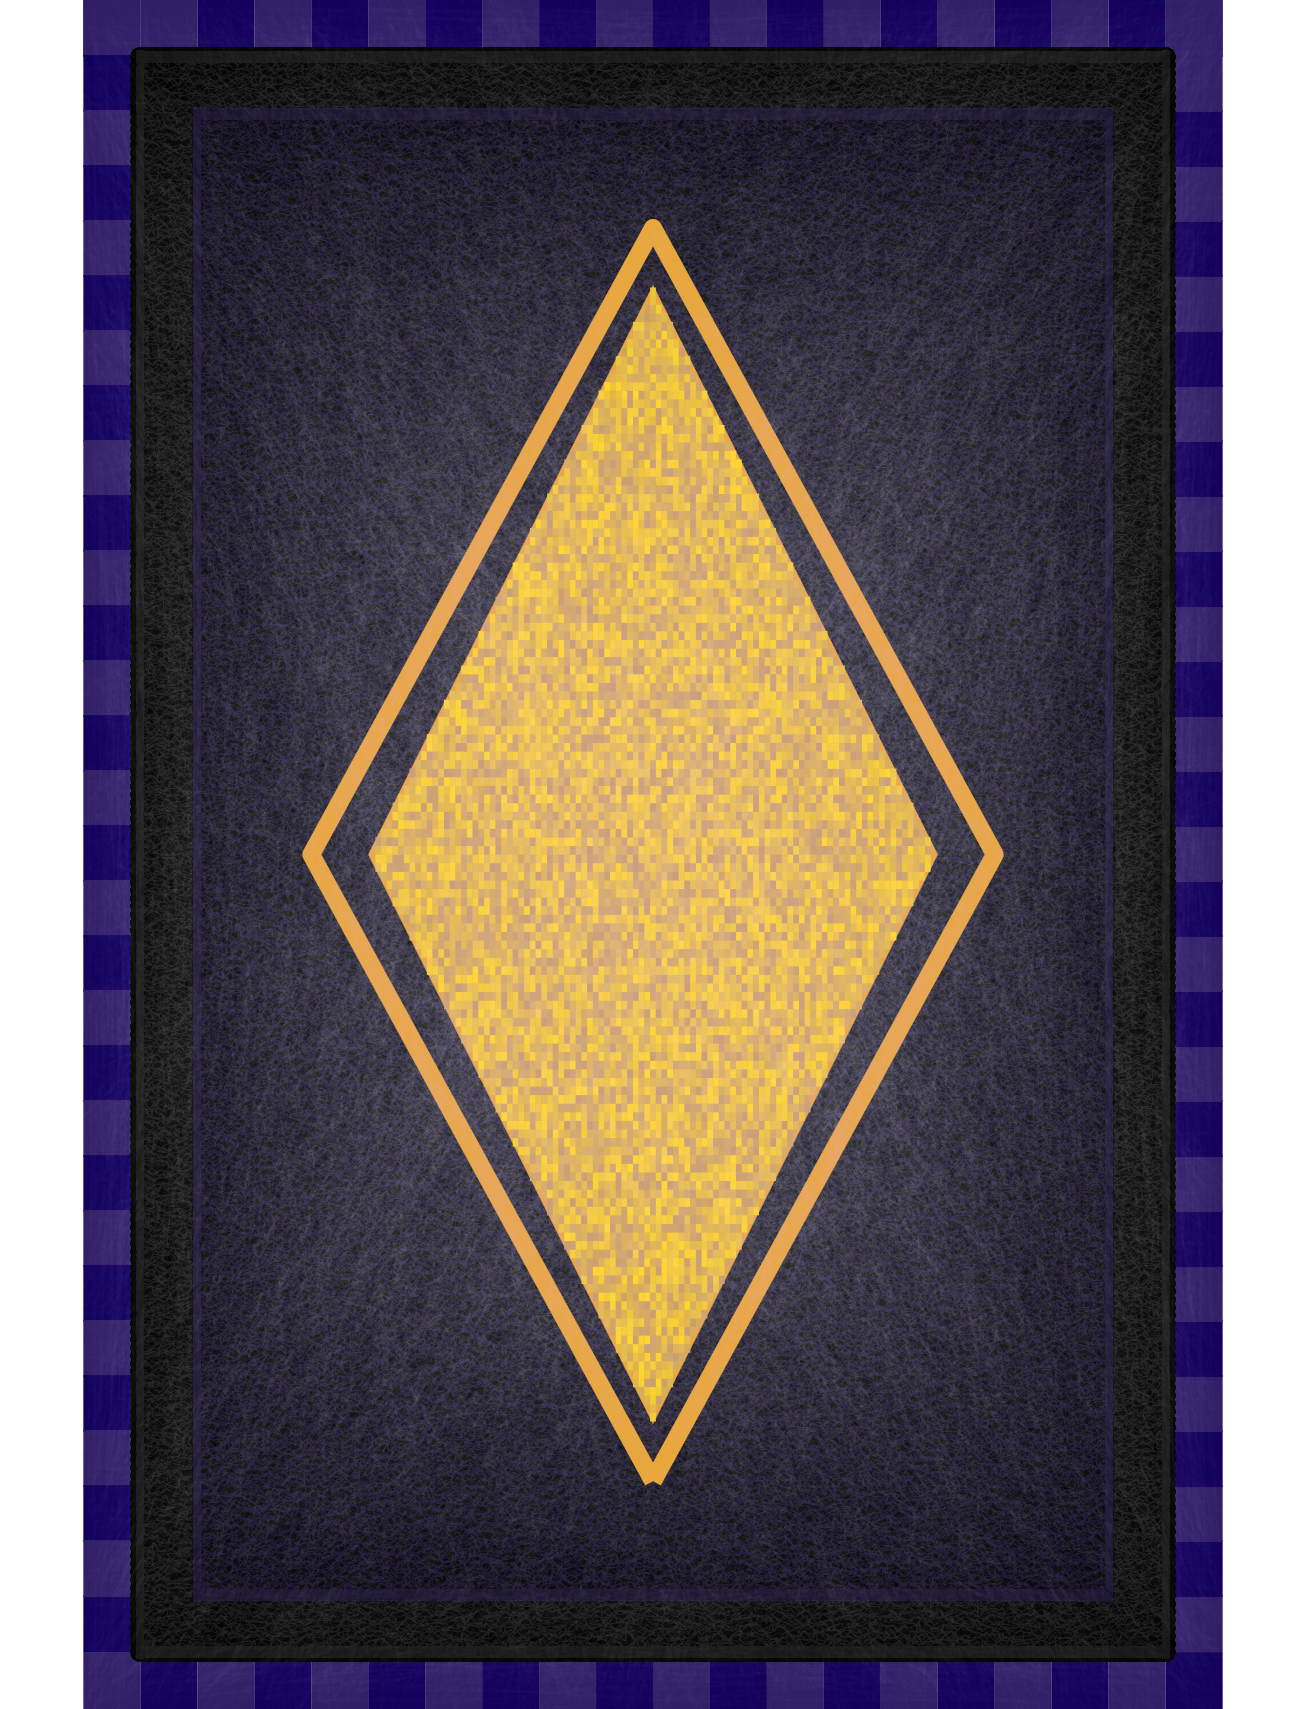 A generative art piece that is designed as a blue rug. The border is checkered with varying blue squares, the center is dark blue with a single textured gold diamond in the center. A black border is around the dark blue section of the rug.